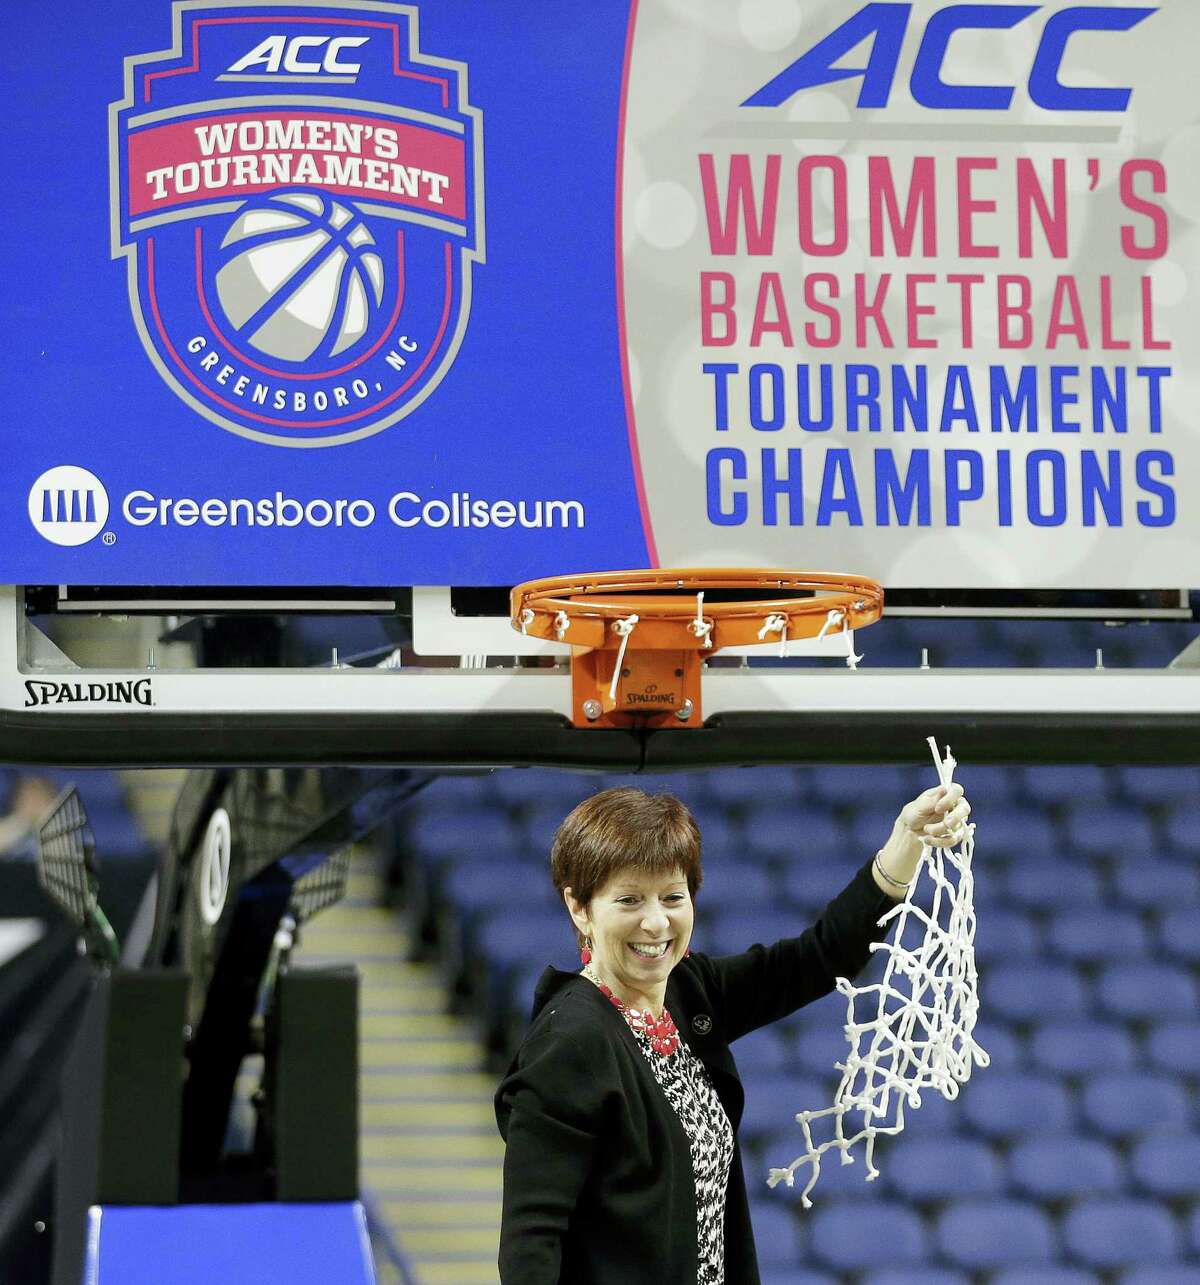 In this March 8, 2015 photo, Notre Dame head coach Muffet McGraw celebrates after an NCAA college basketball game against Florida State in the championship of the Atlantic Coast Conference tournament in Greensboro, N.C. The NCAA says it will consider North Carolina as a host for championship events again after the state rolled back a law that limited protections for LGBT people. In a statement on April 4, 2017, the governing body said its Board of Governors had reviewed moves to repeal repealed the so-called “bathroom bill” and replace it with a compromise law.